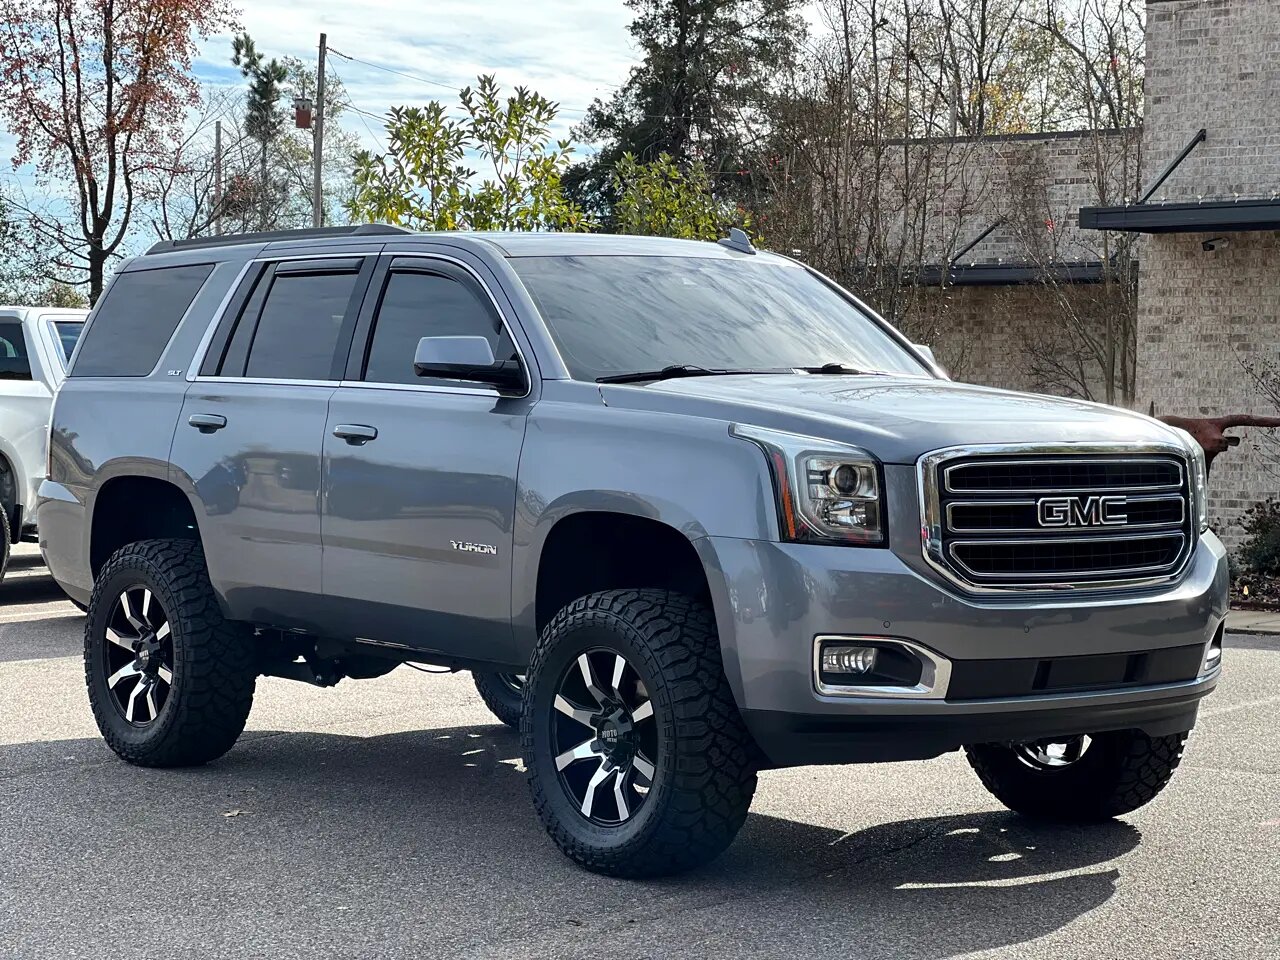 The 2020 GMC Yukon that was reported stolen from Crossroad Motors